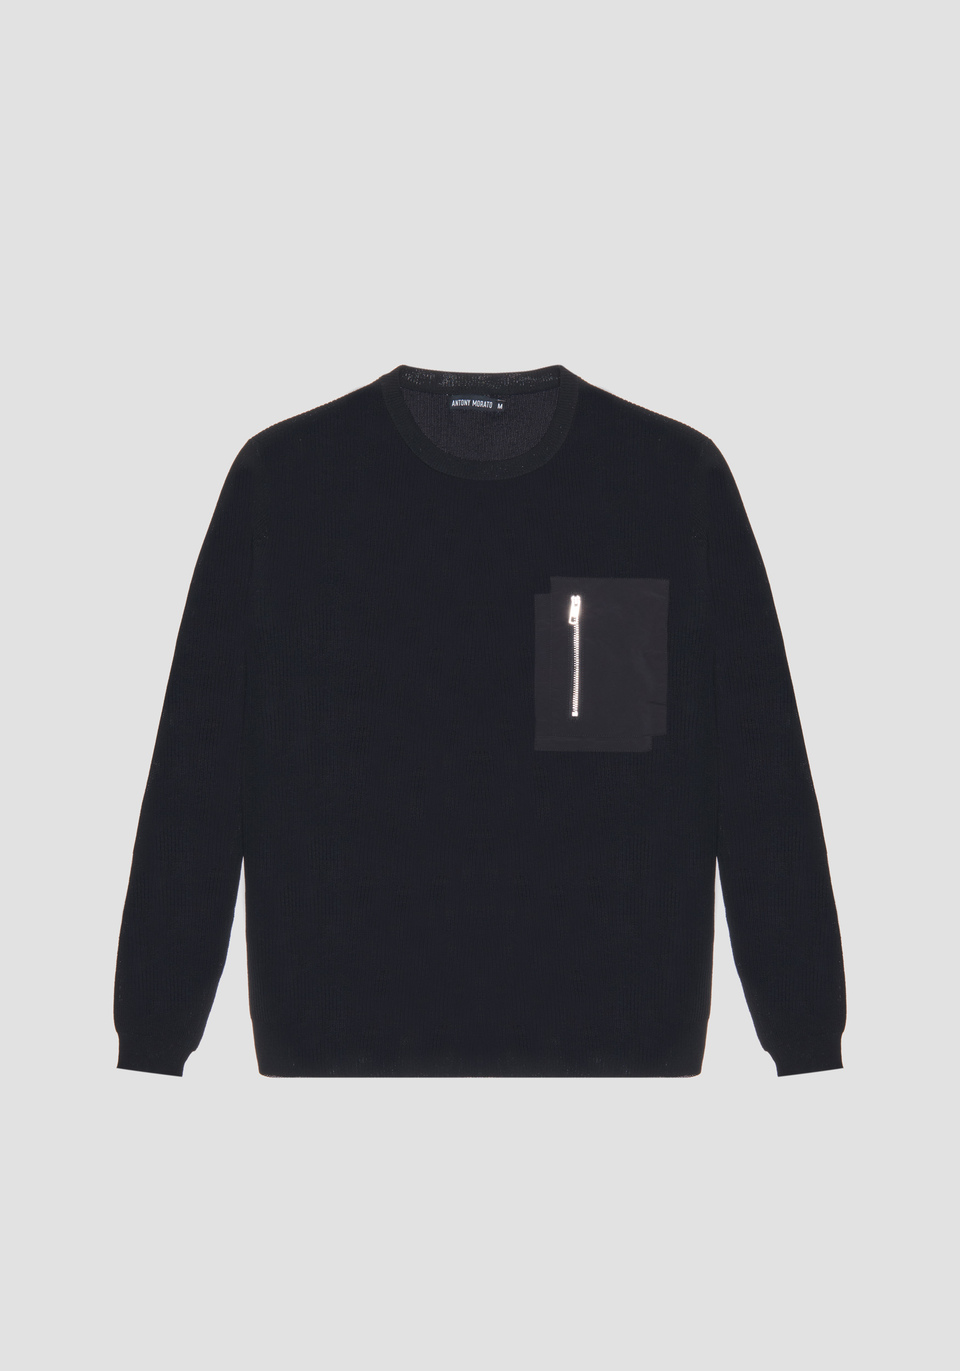 SLIM FIT SWEATER IN COTTON BLEND YARN WITH CONTRASTING POCKET - Antony Morato Online Shop